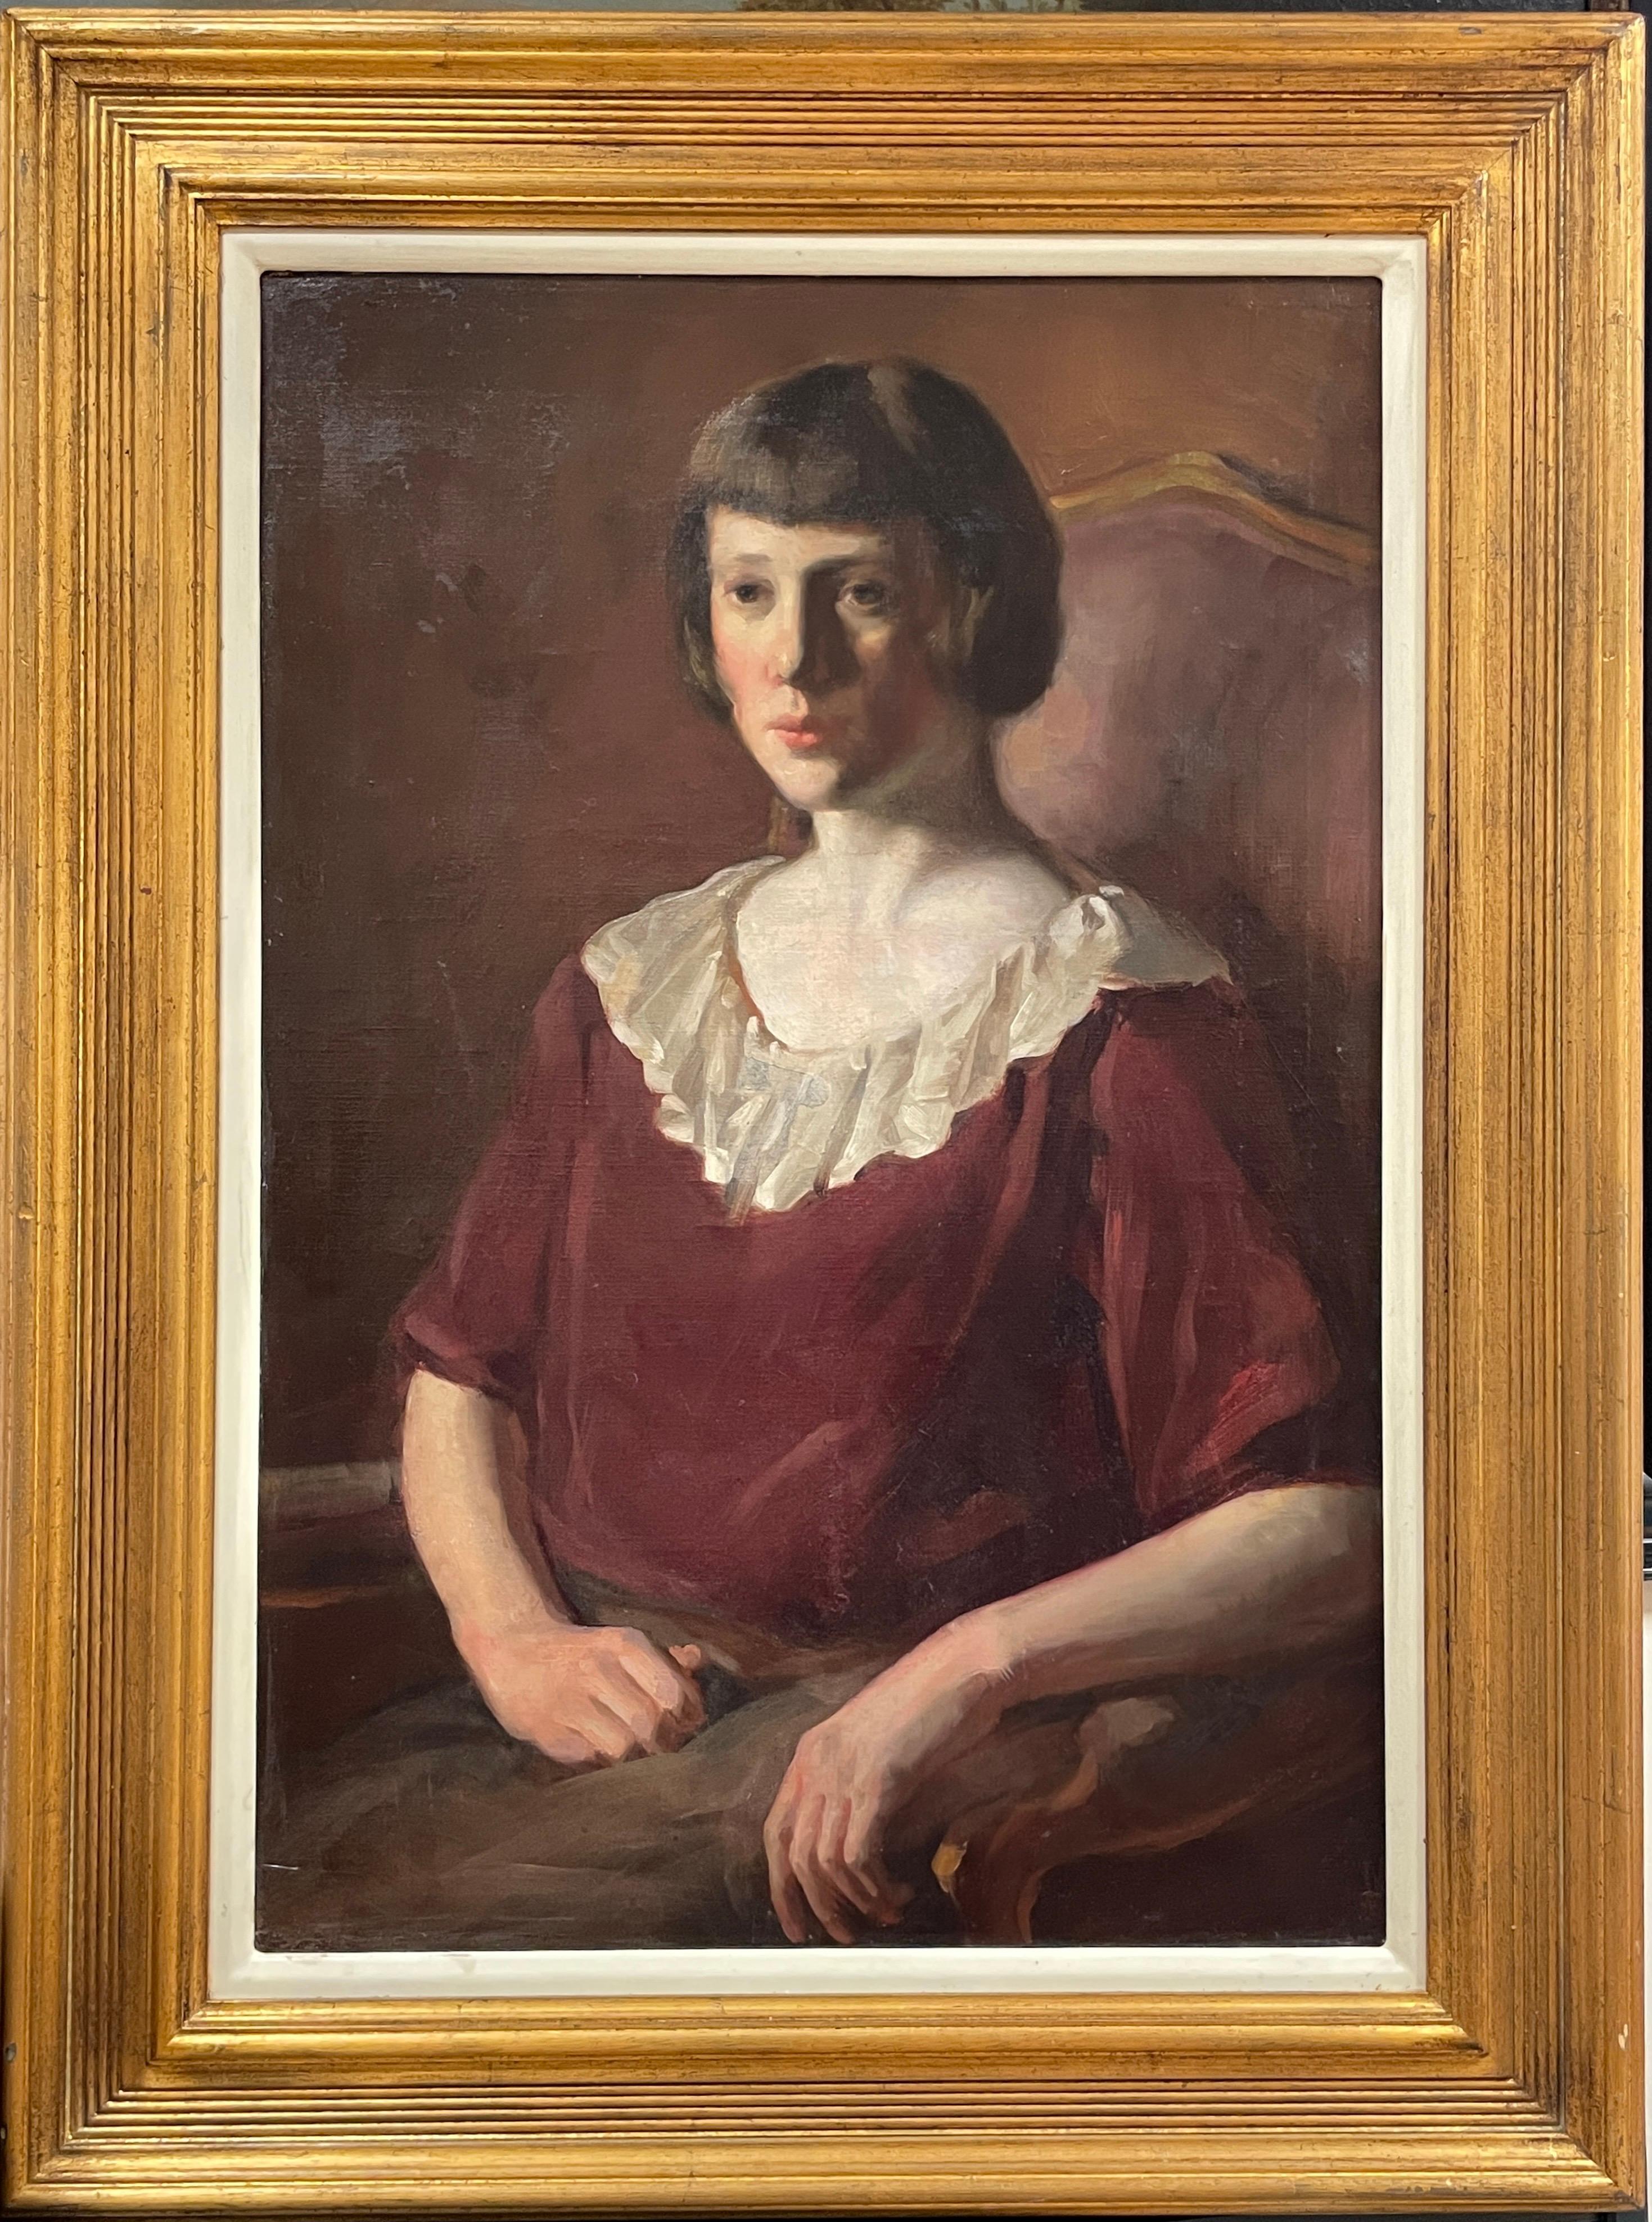 Portrait of a Young Lady
English School, circa 1930's
oil painting on canvas, framed
framed size: 40 x 30 inches
condition: very good and ready to hang (former repairs showing to the reverse)
presented in fluted gilt frame
provenance: from a private